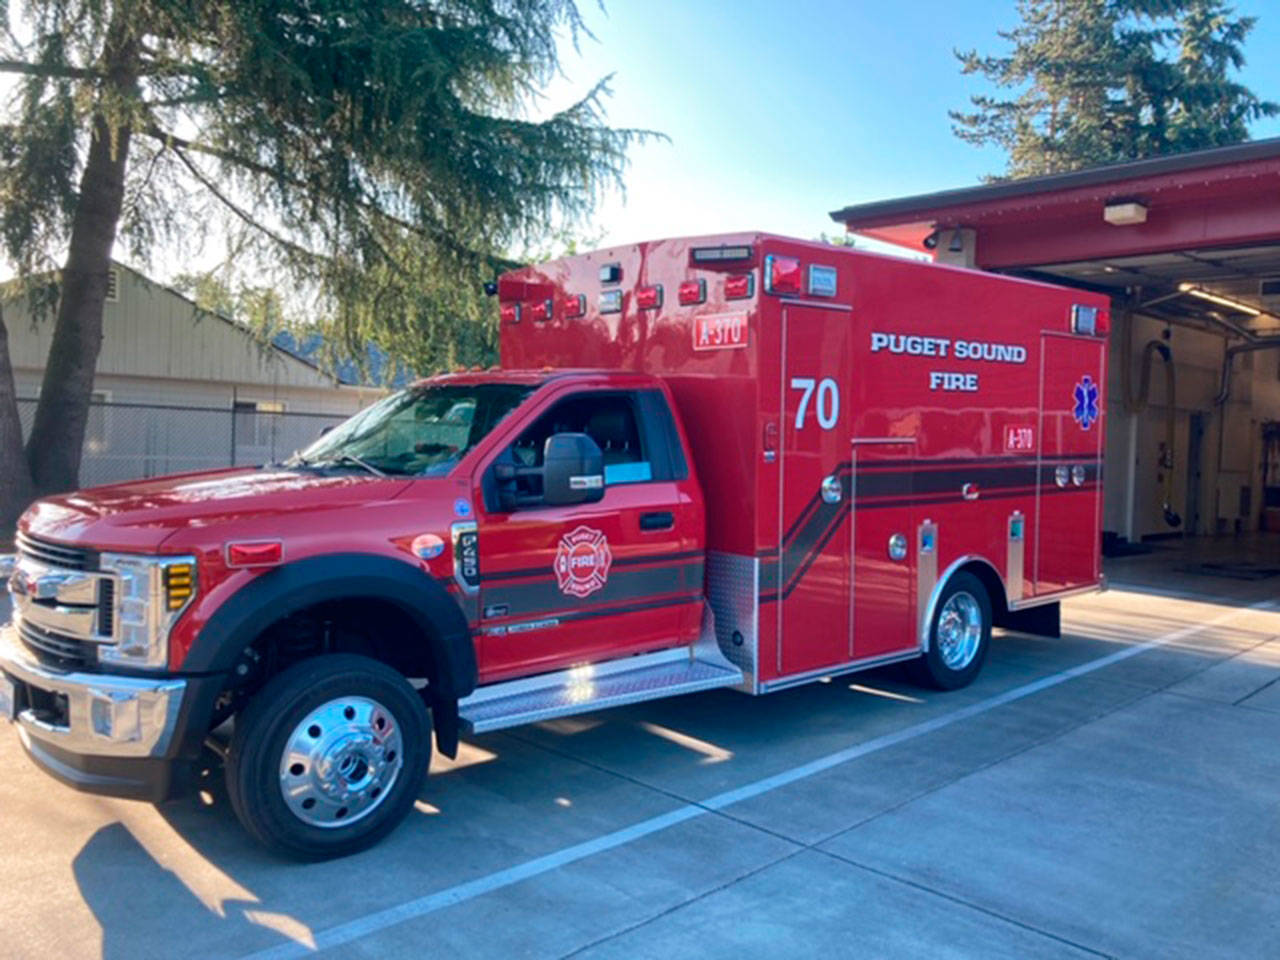 A new aid car purchased by Puget Sound Fire that will work out of the downtown Kent station. COURTESY PHOTO, Puget Sound Fire